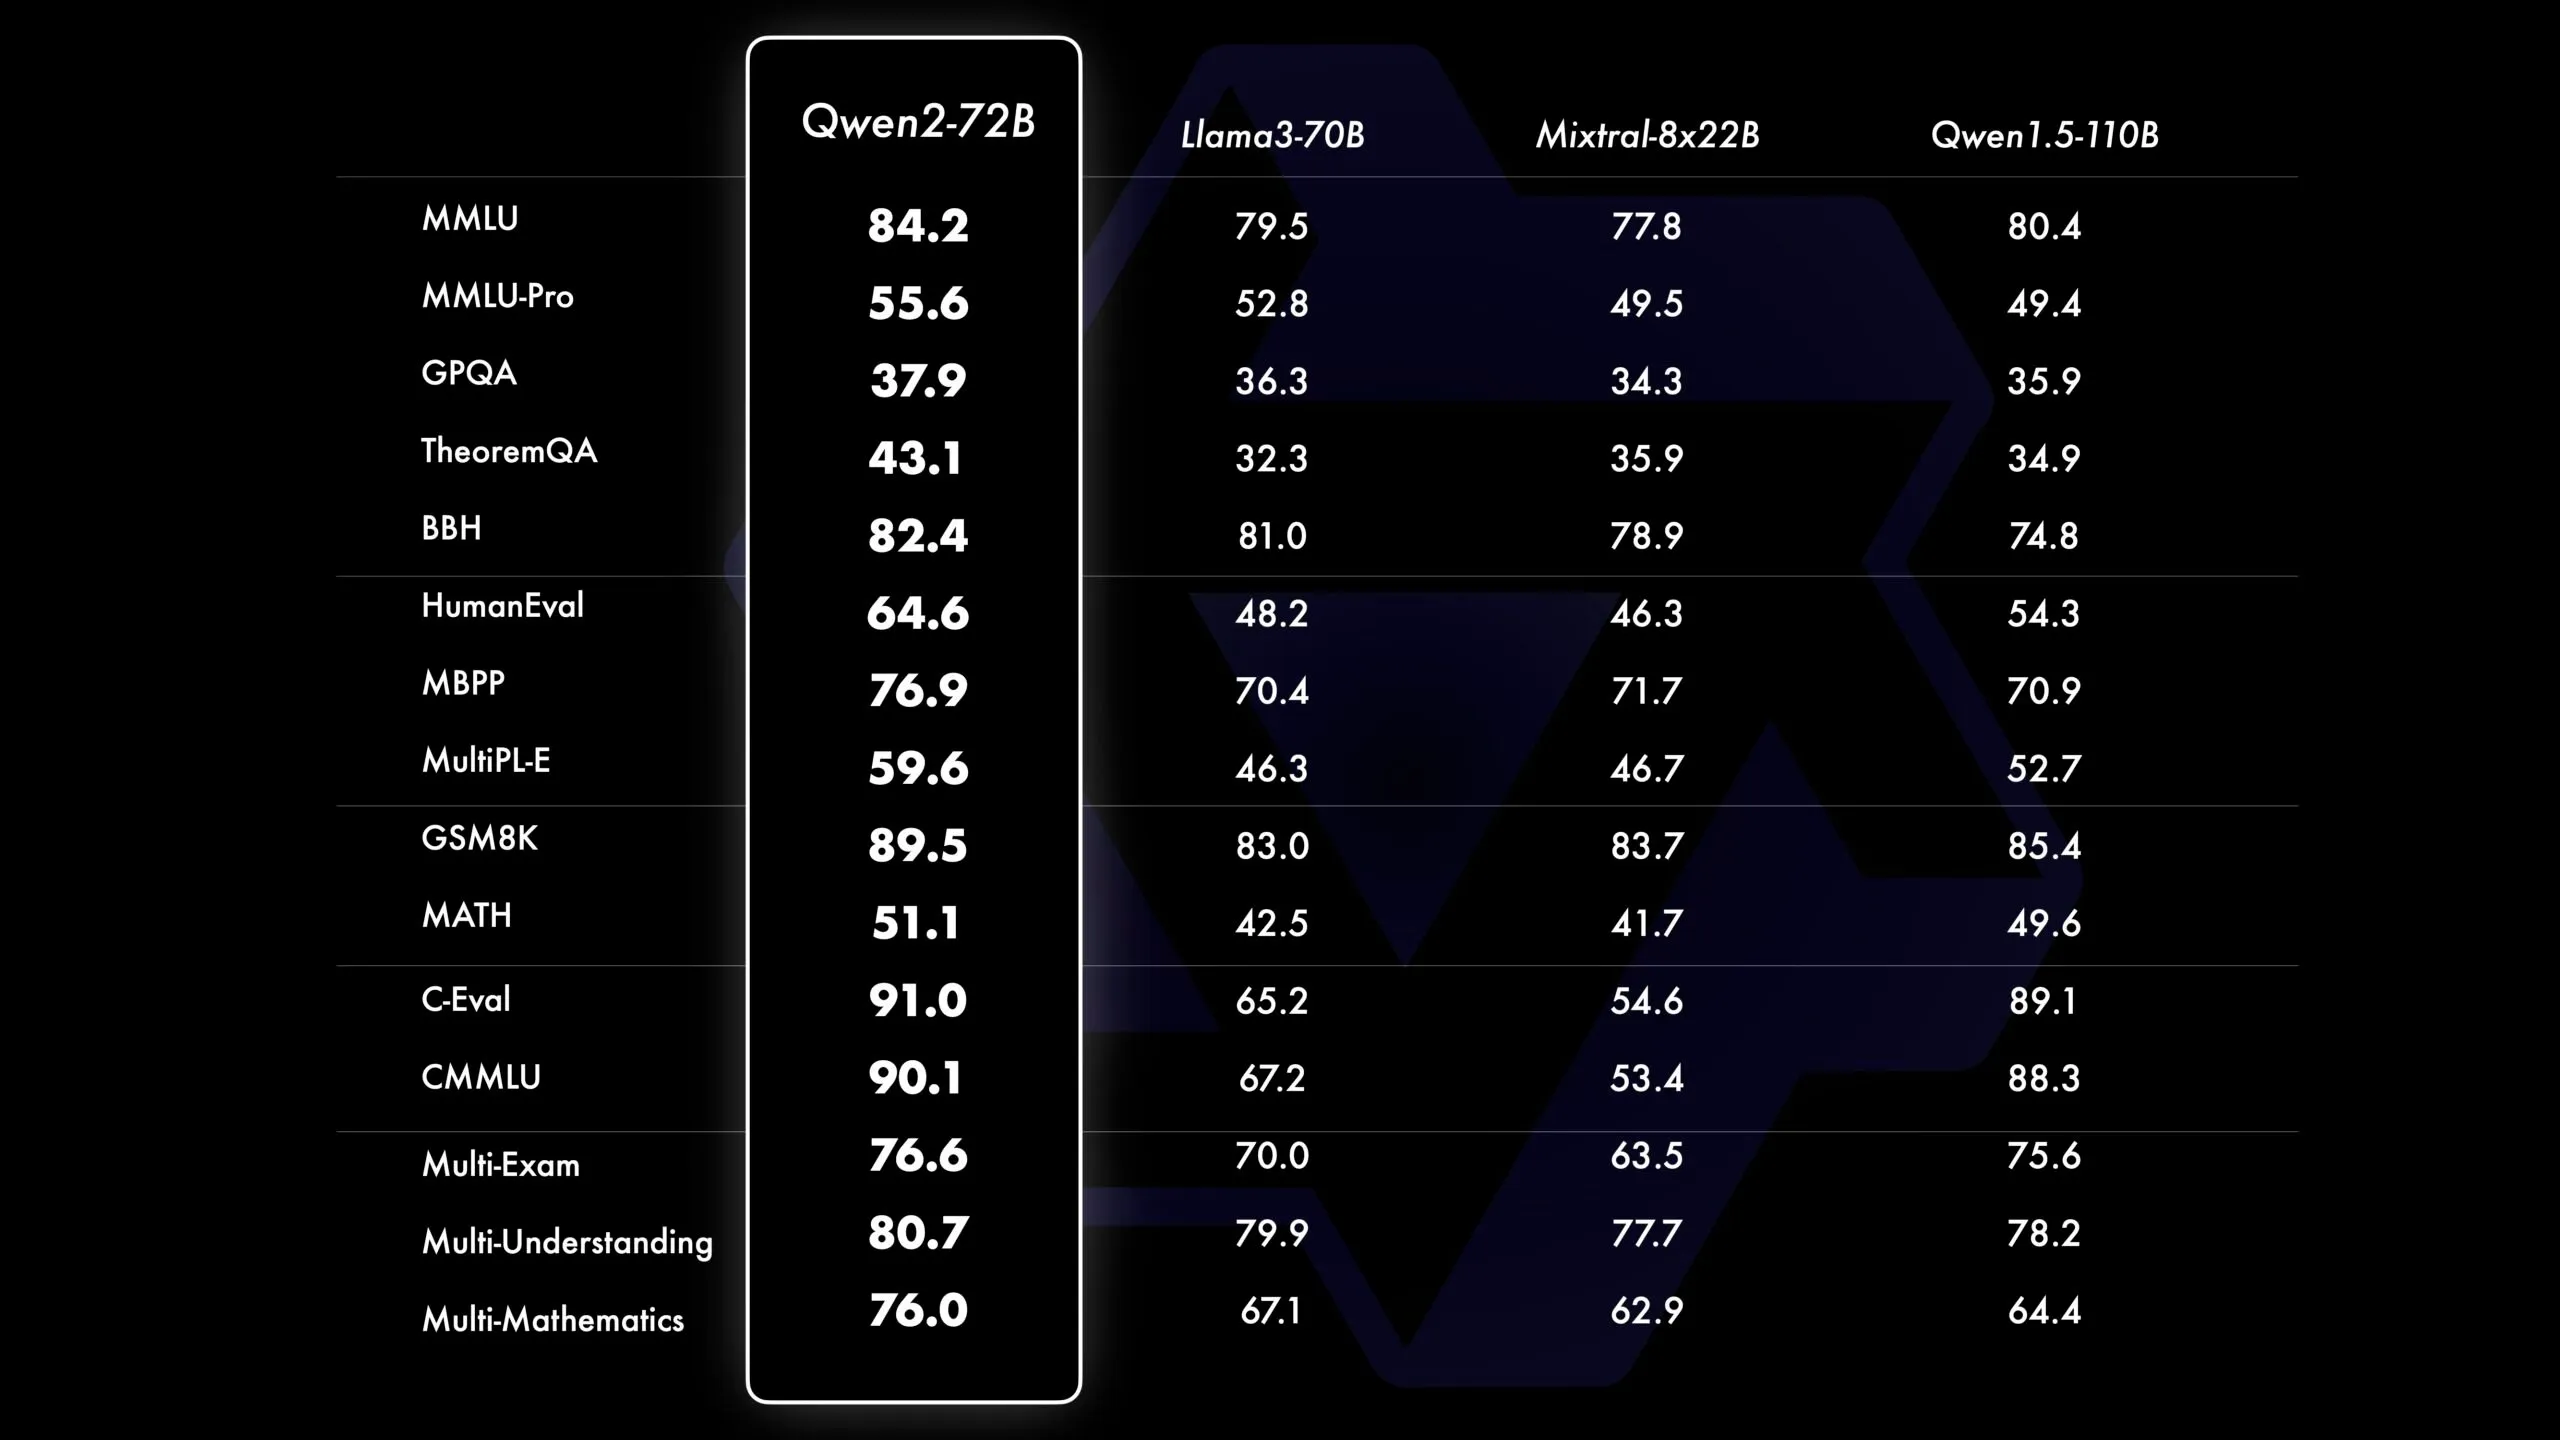 Qwen2 performs better than Llama3, Mixtral and Qwen1.5 in synthetic benchmarks. Image: Alibaba Cloud